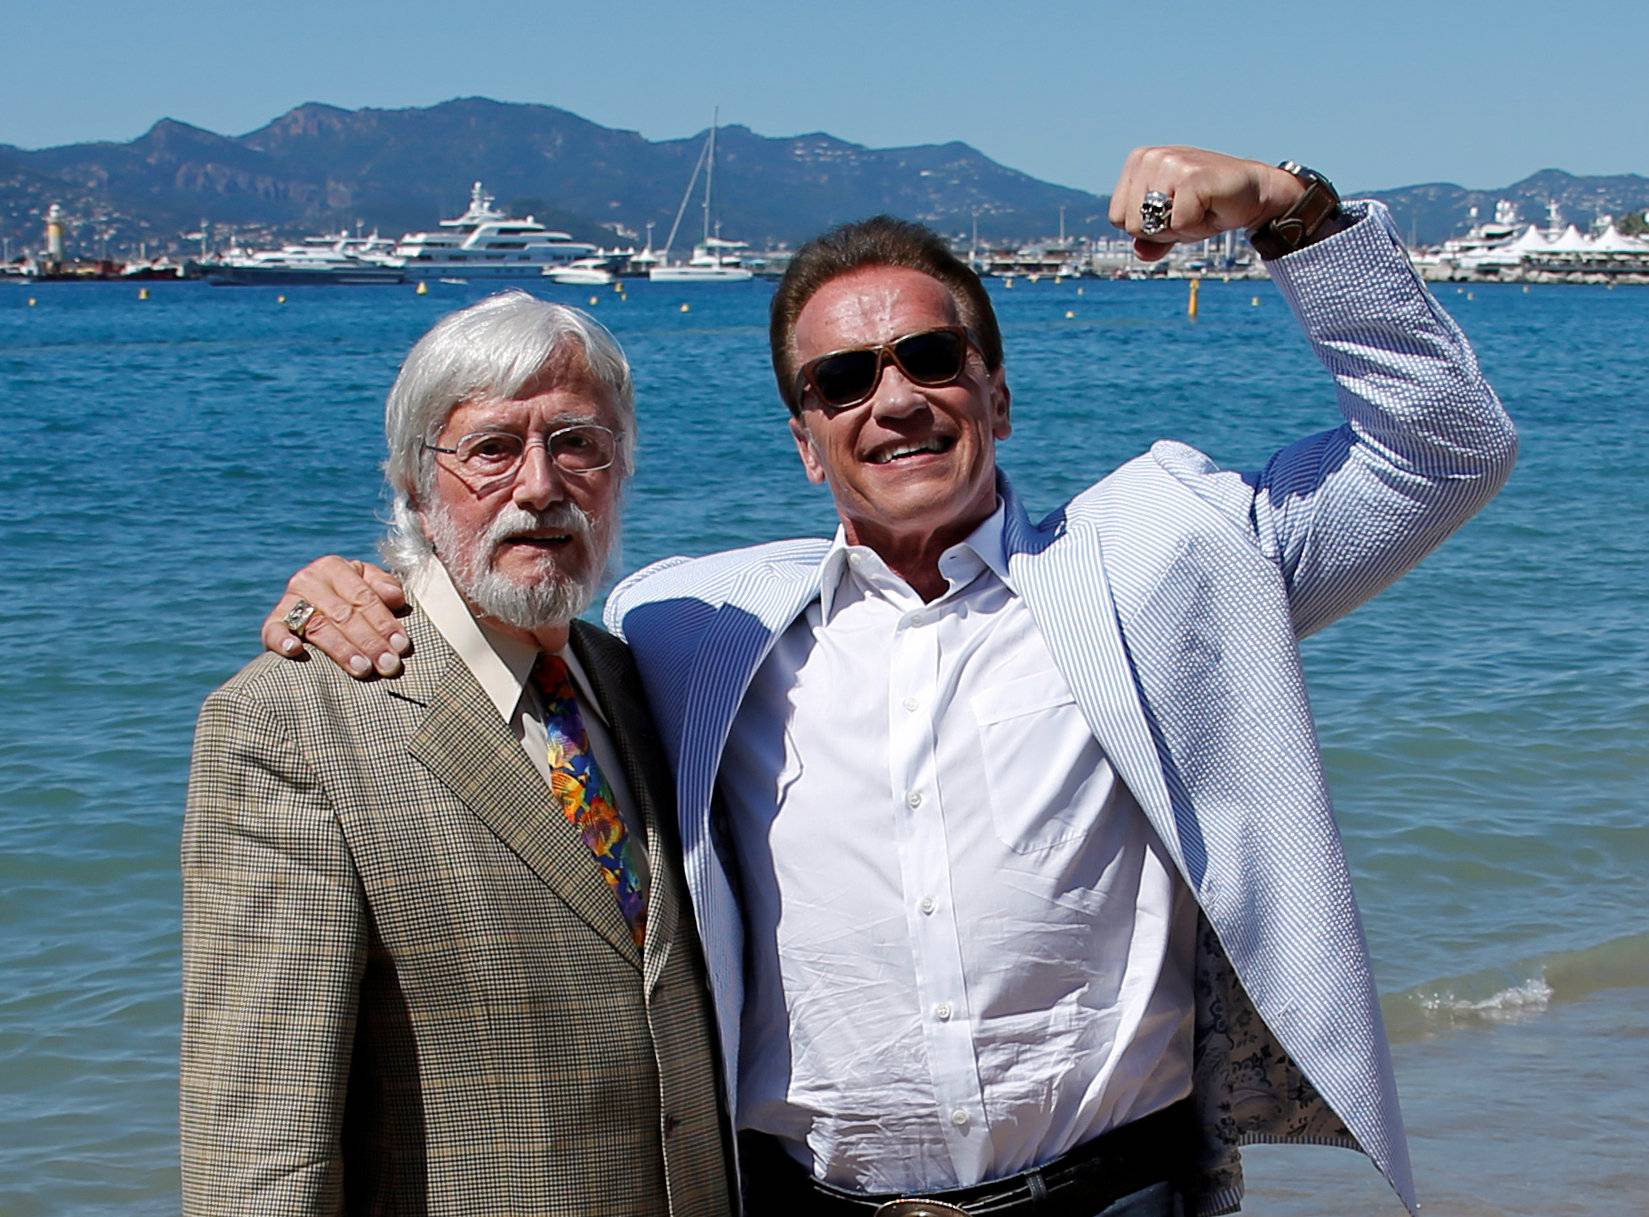 70th Cannes Film Festival - Photocall for the documentary Wonders of the Sea 3D